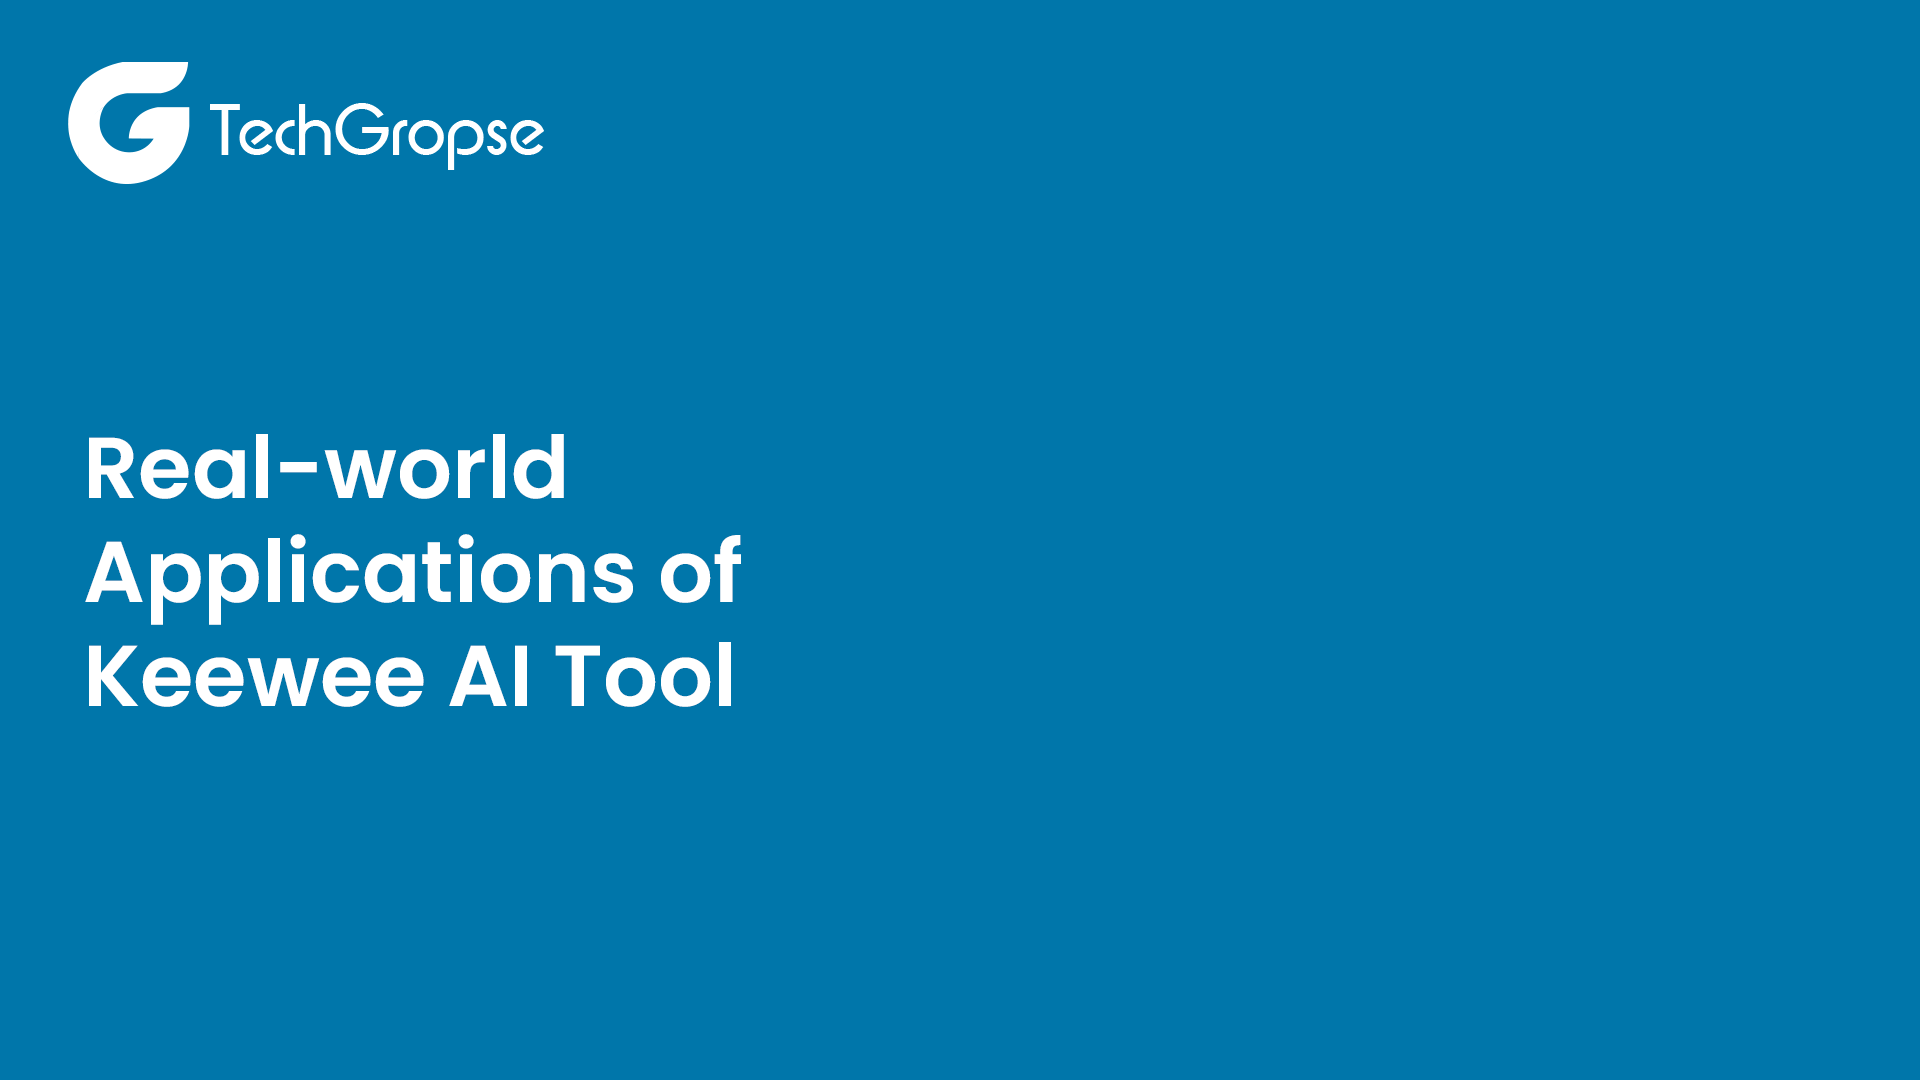 Real-world Applications of Keewee AI Tool